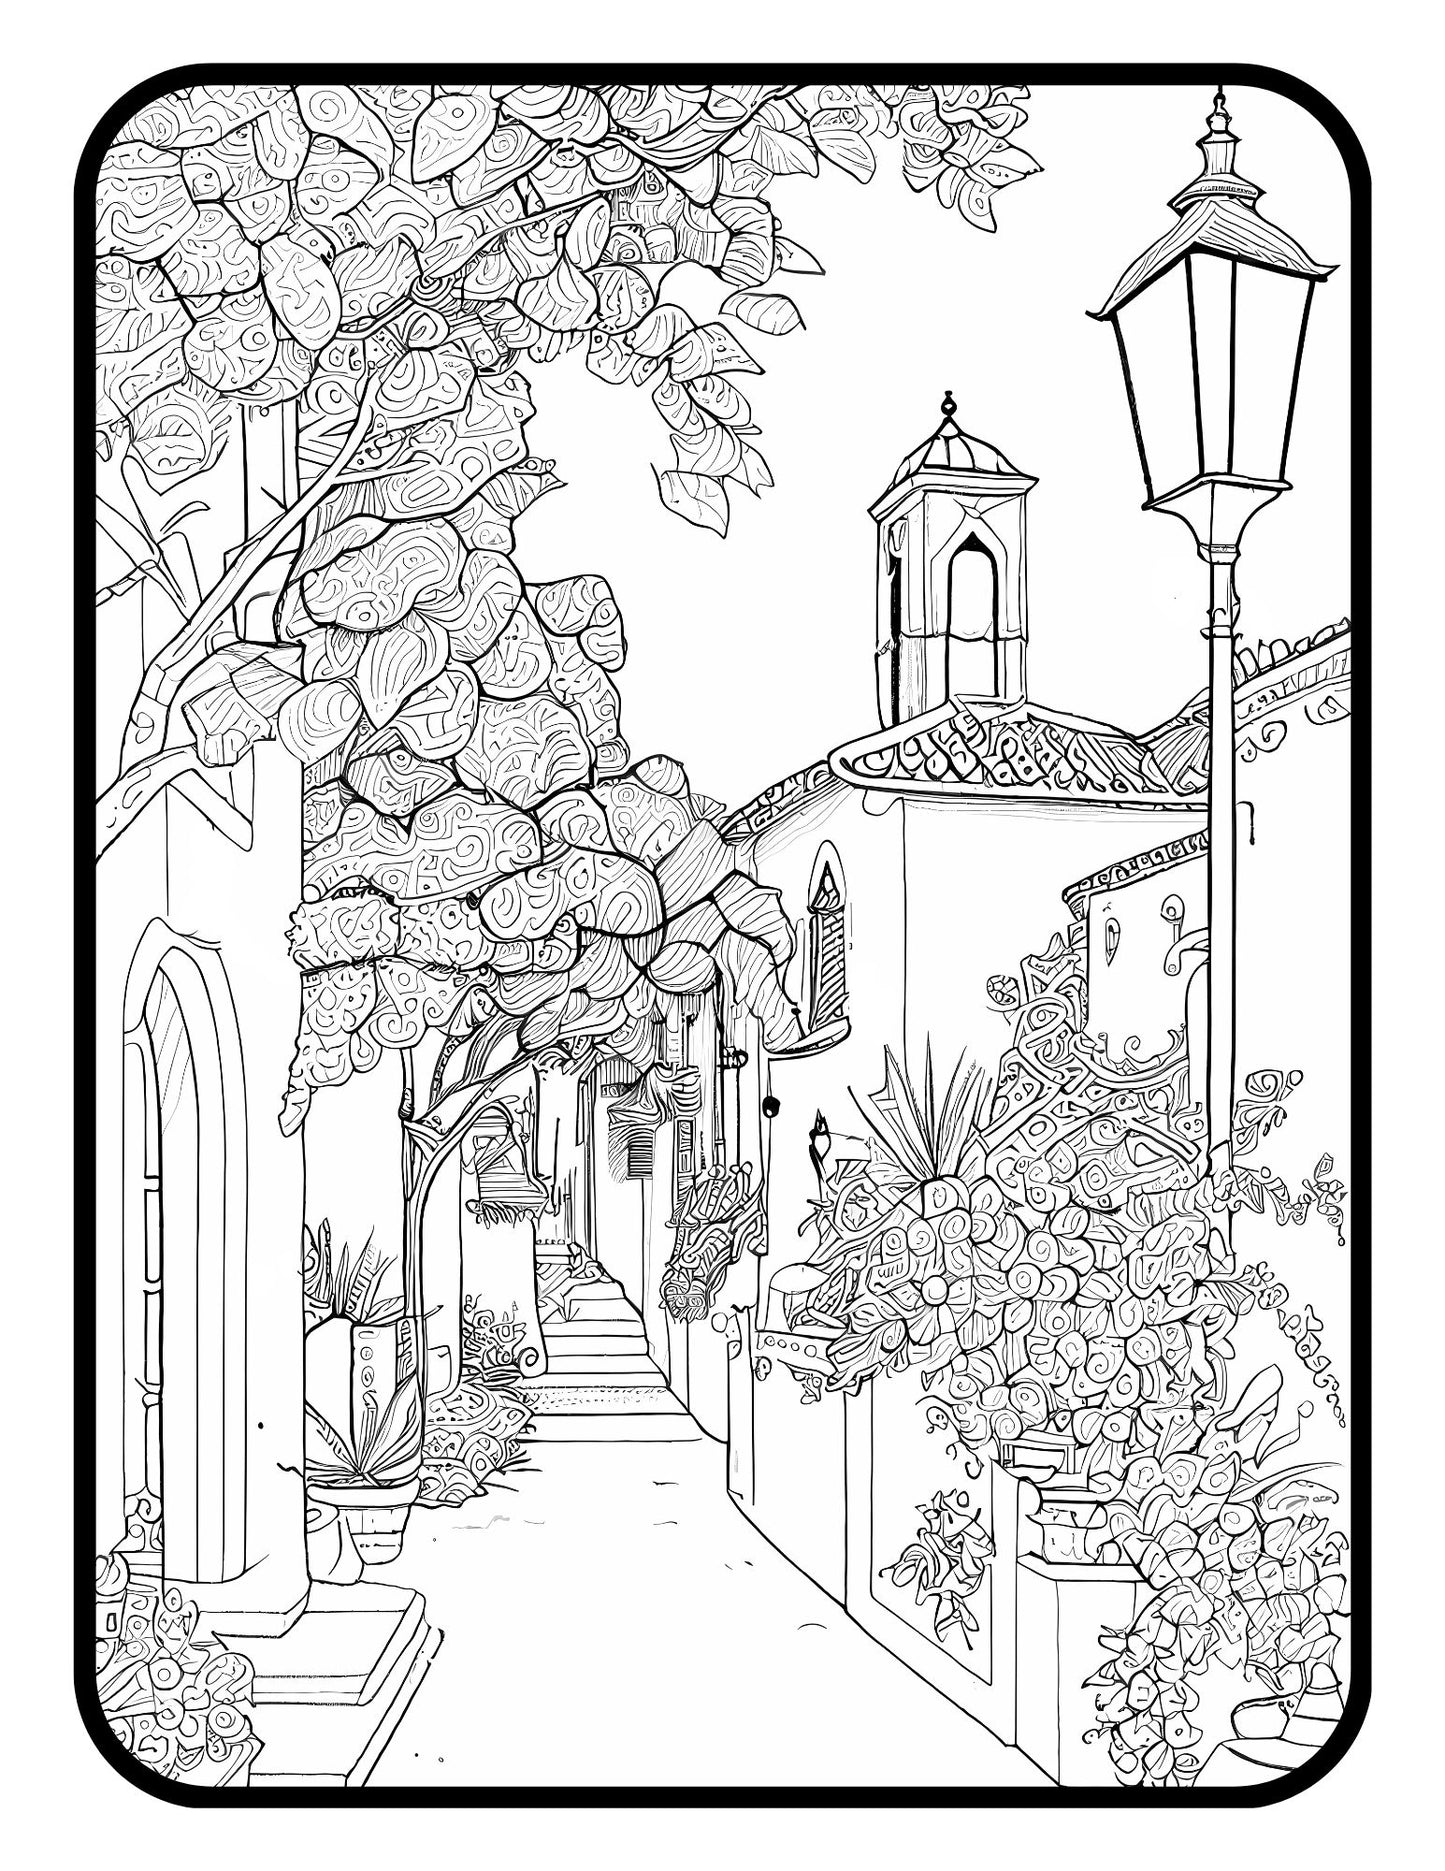 Famous Places Coloring Book For Adults Travel Coloring Book Gift Landscape Coloring Book For Adults Places Coloring Book Relaxation Gift